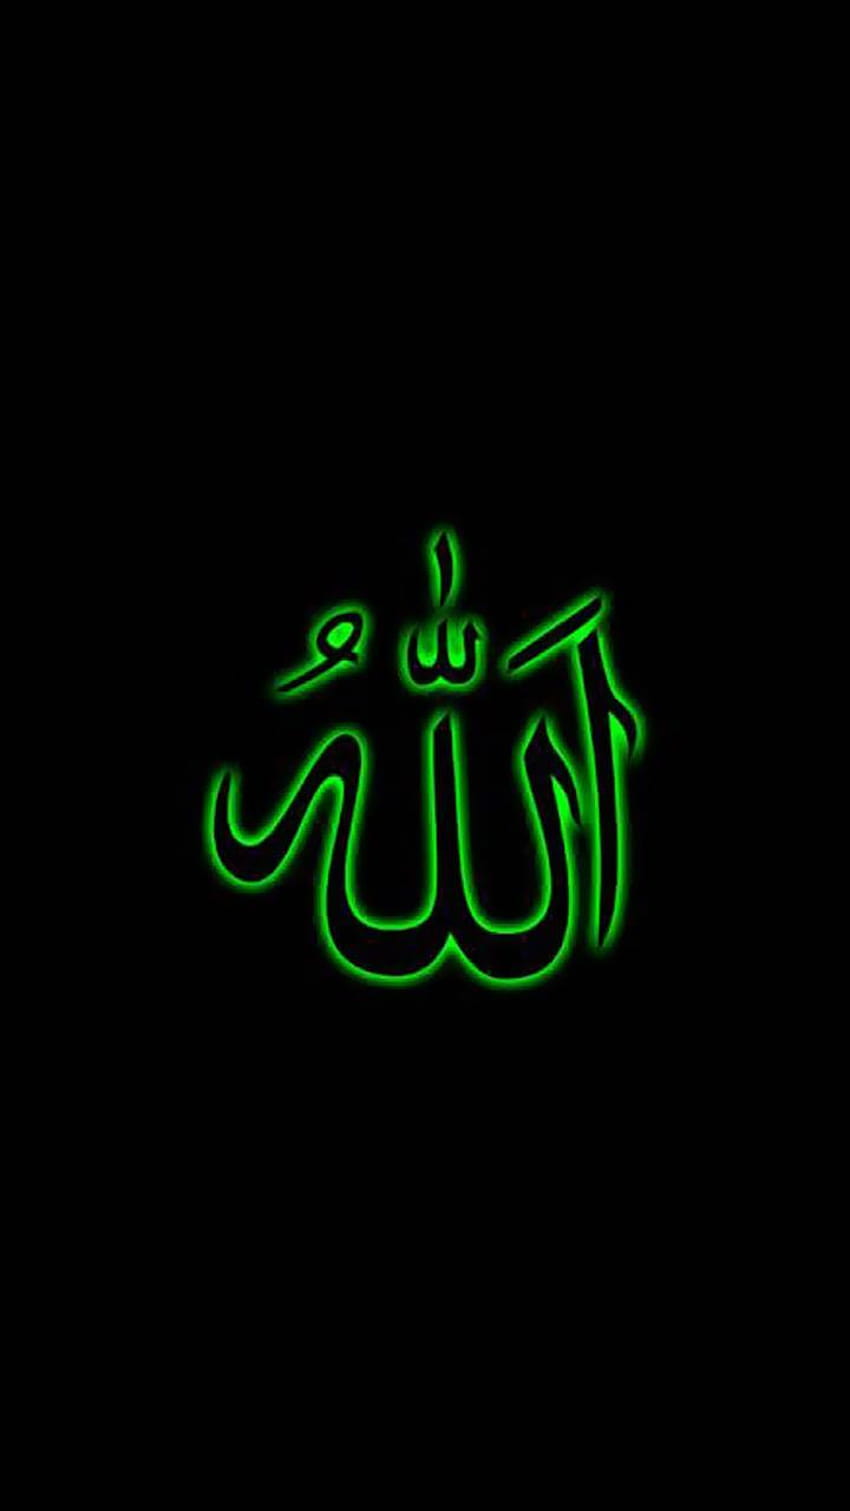 Allah for Android, allah swt HD phone wallpaper